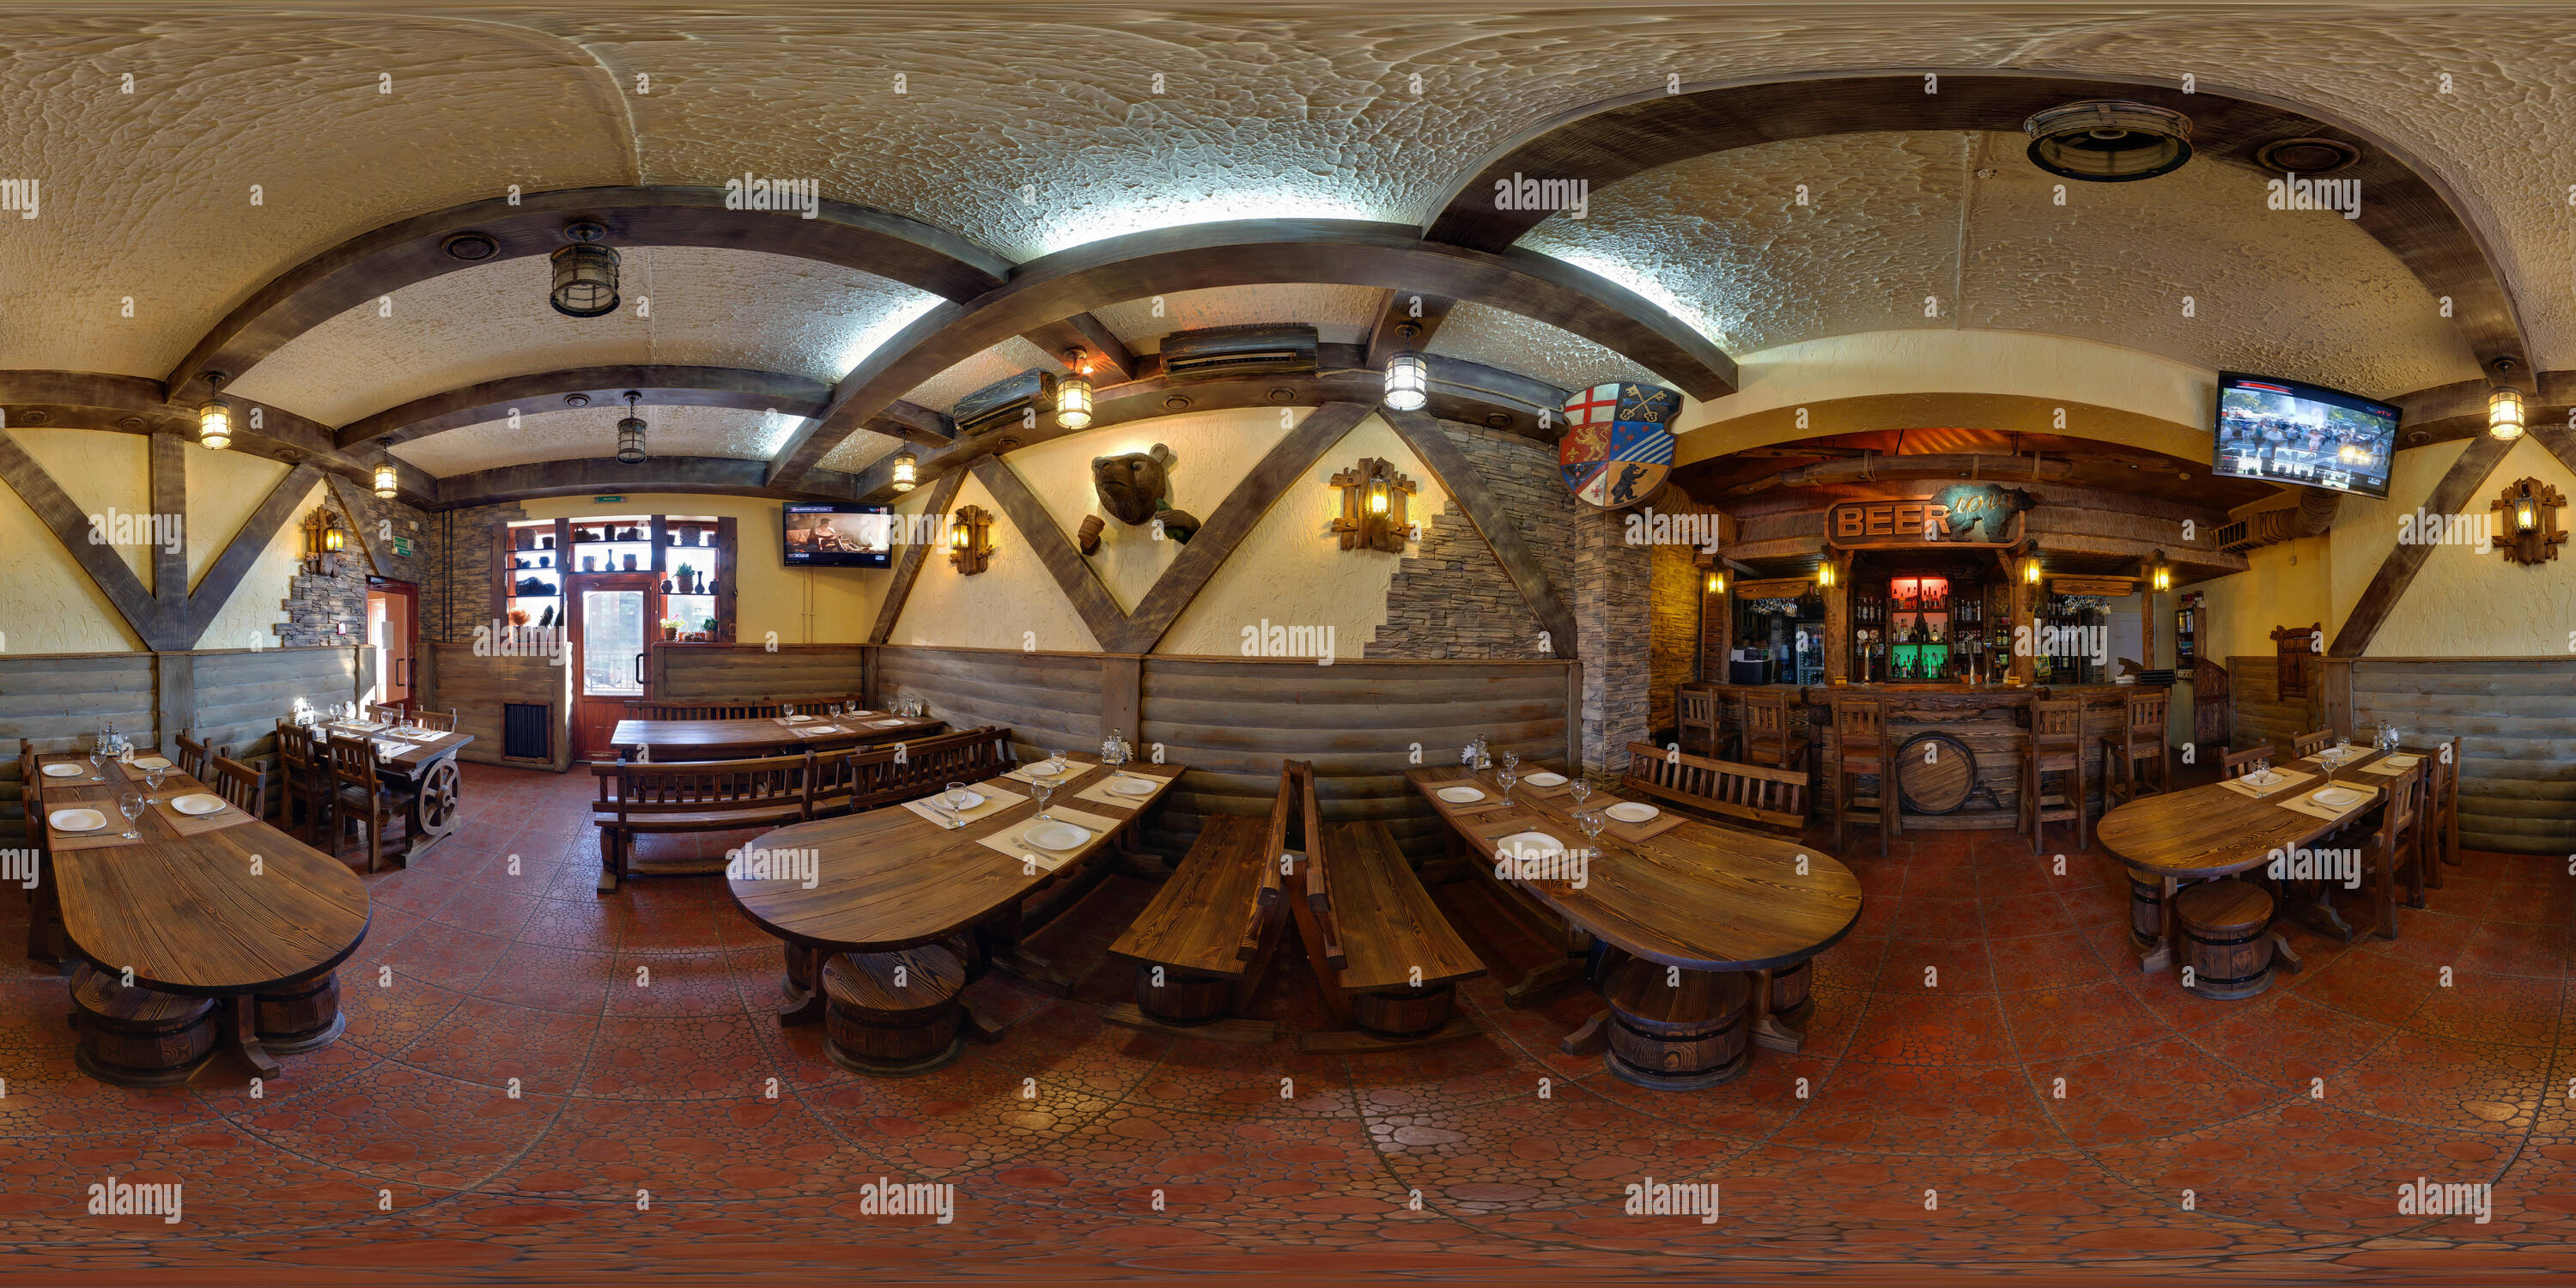 360 degree panoramic view of GRODNO, BELARUS - NOVEMBER 12, 2012: 360 panorama view in wooden interior of small stylish vintage cafe bar, full 360 by 180 degrees angle panorama in